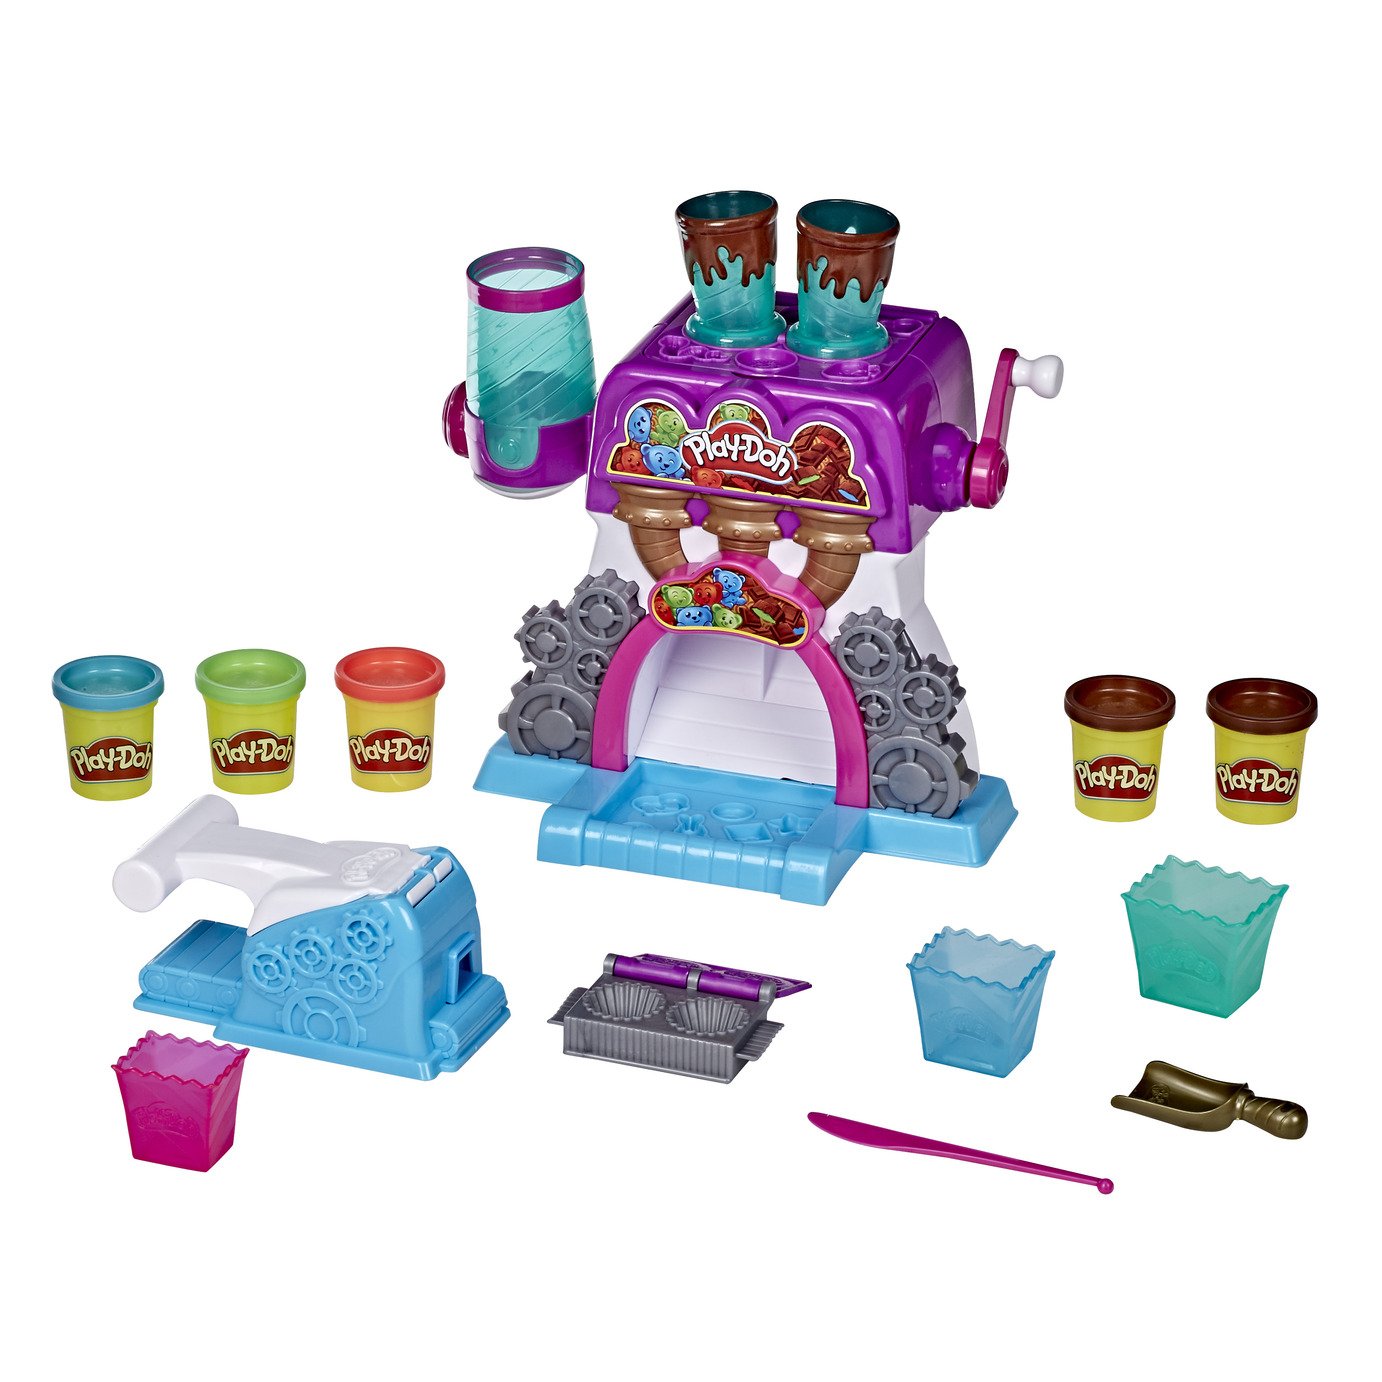 Play-Doh Kitchen Creations Candy Delight Playset Review